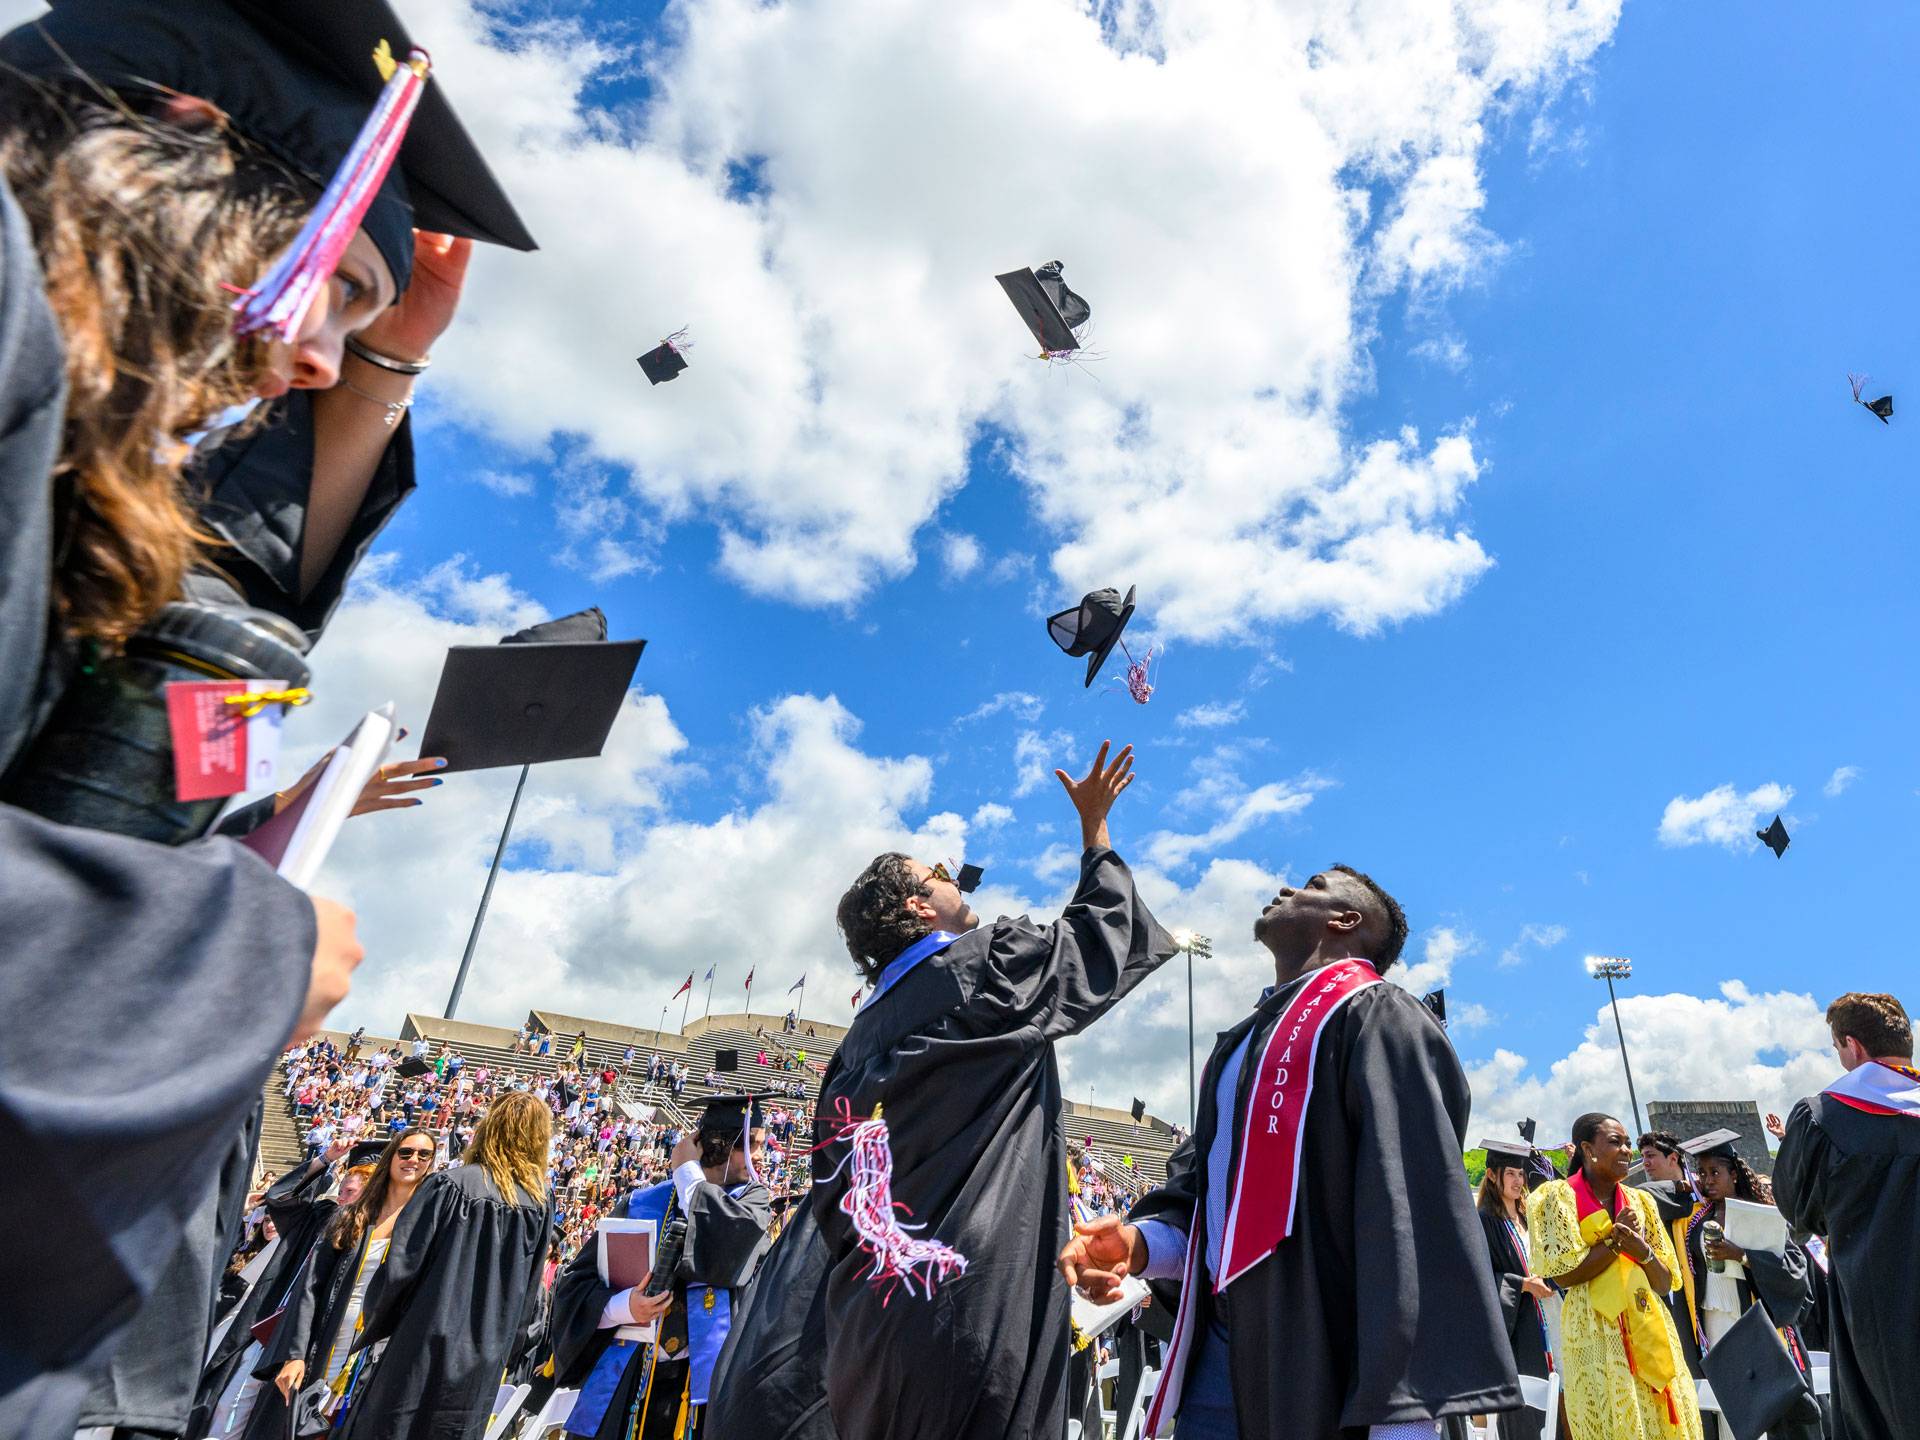 Two graduates in gowns throw their caps into the blue sky.